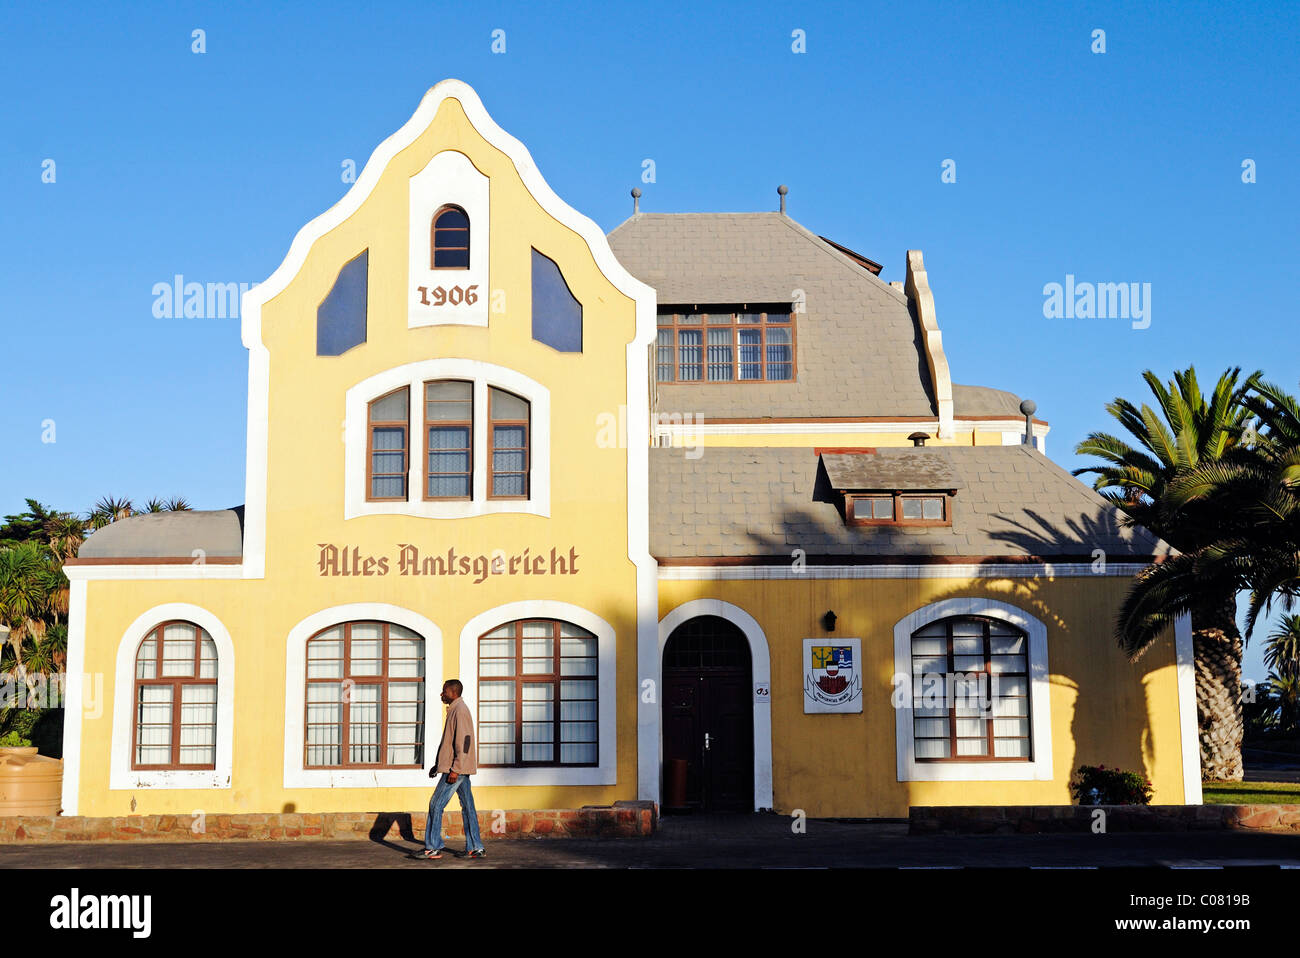 Altes Amtsgericht building, architecture built during the German colonial period, Swakopmund, Namibia, Africa Stock Photo